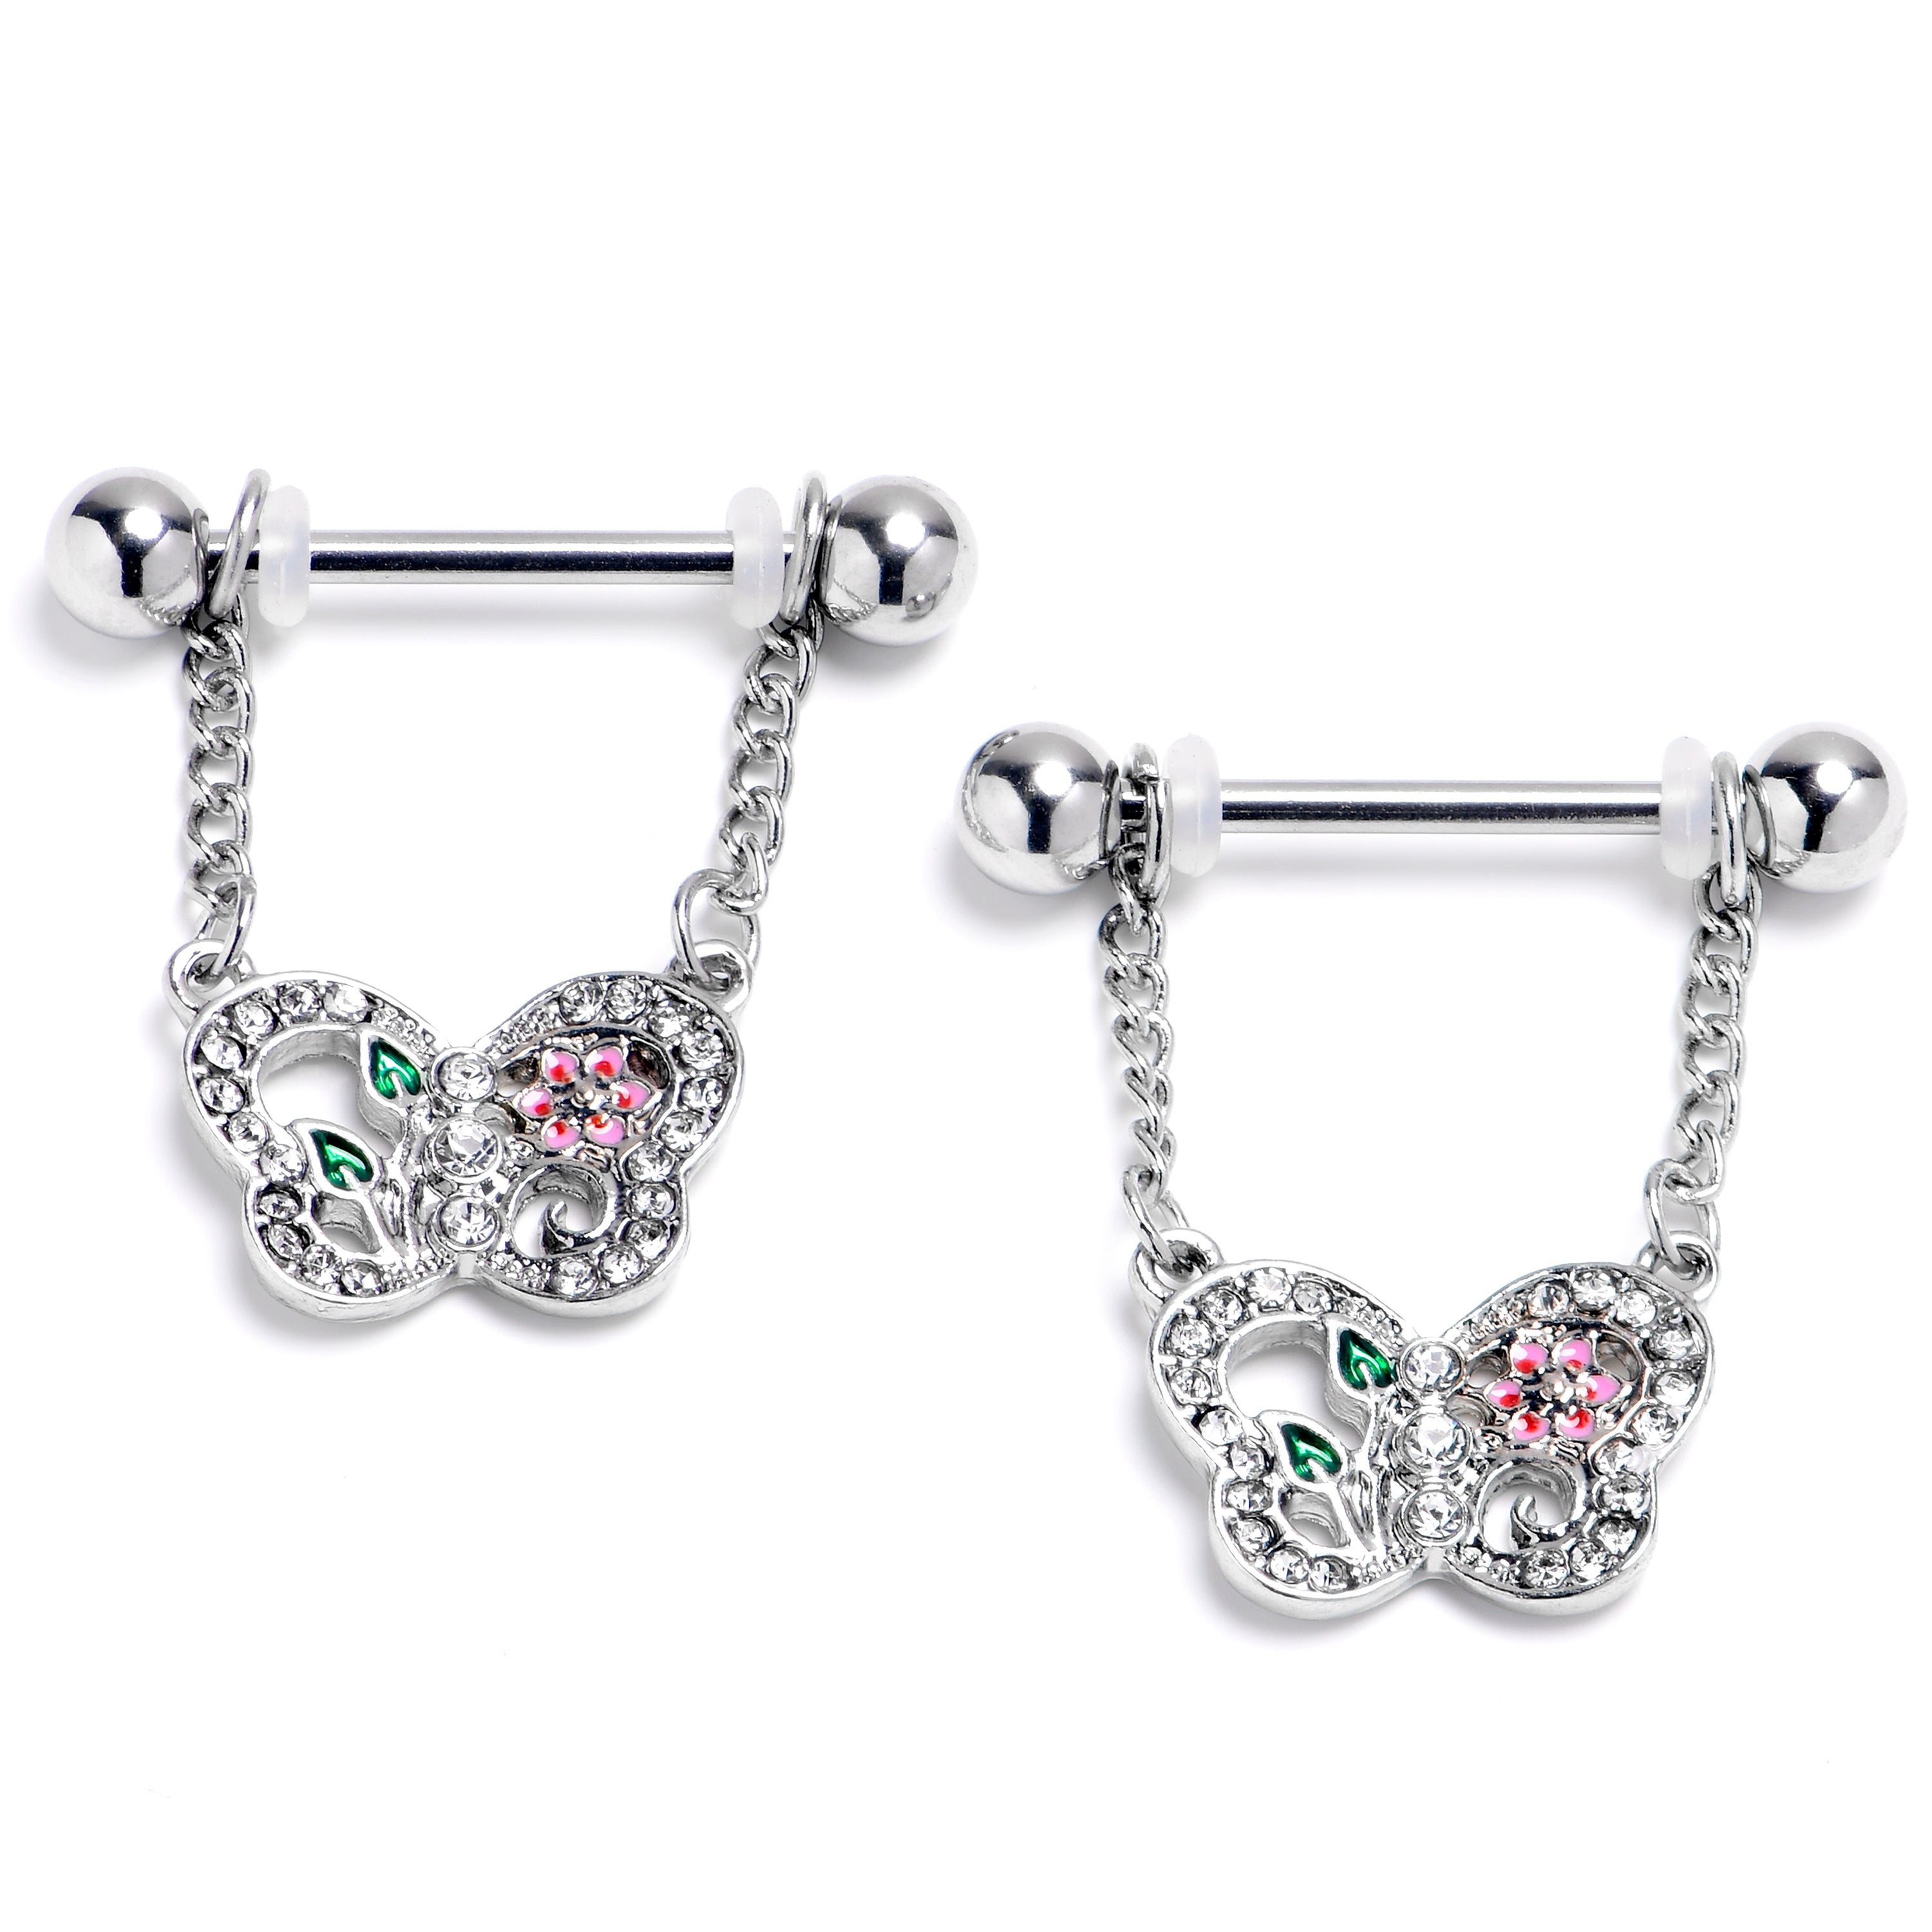 14 Gauge 9/16 Clear Gem Floral Butterfly Style Dangle Nipple Ring Set